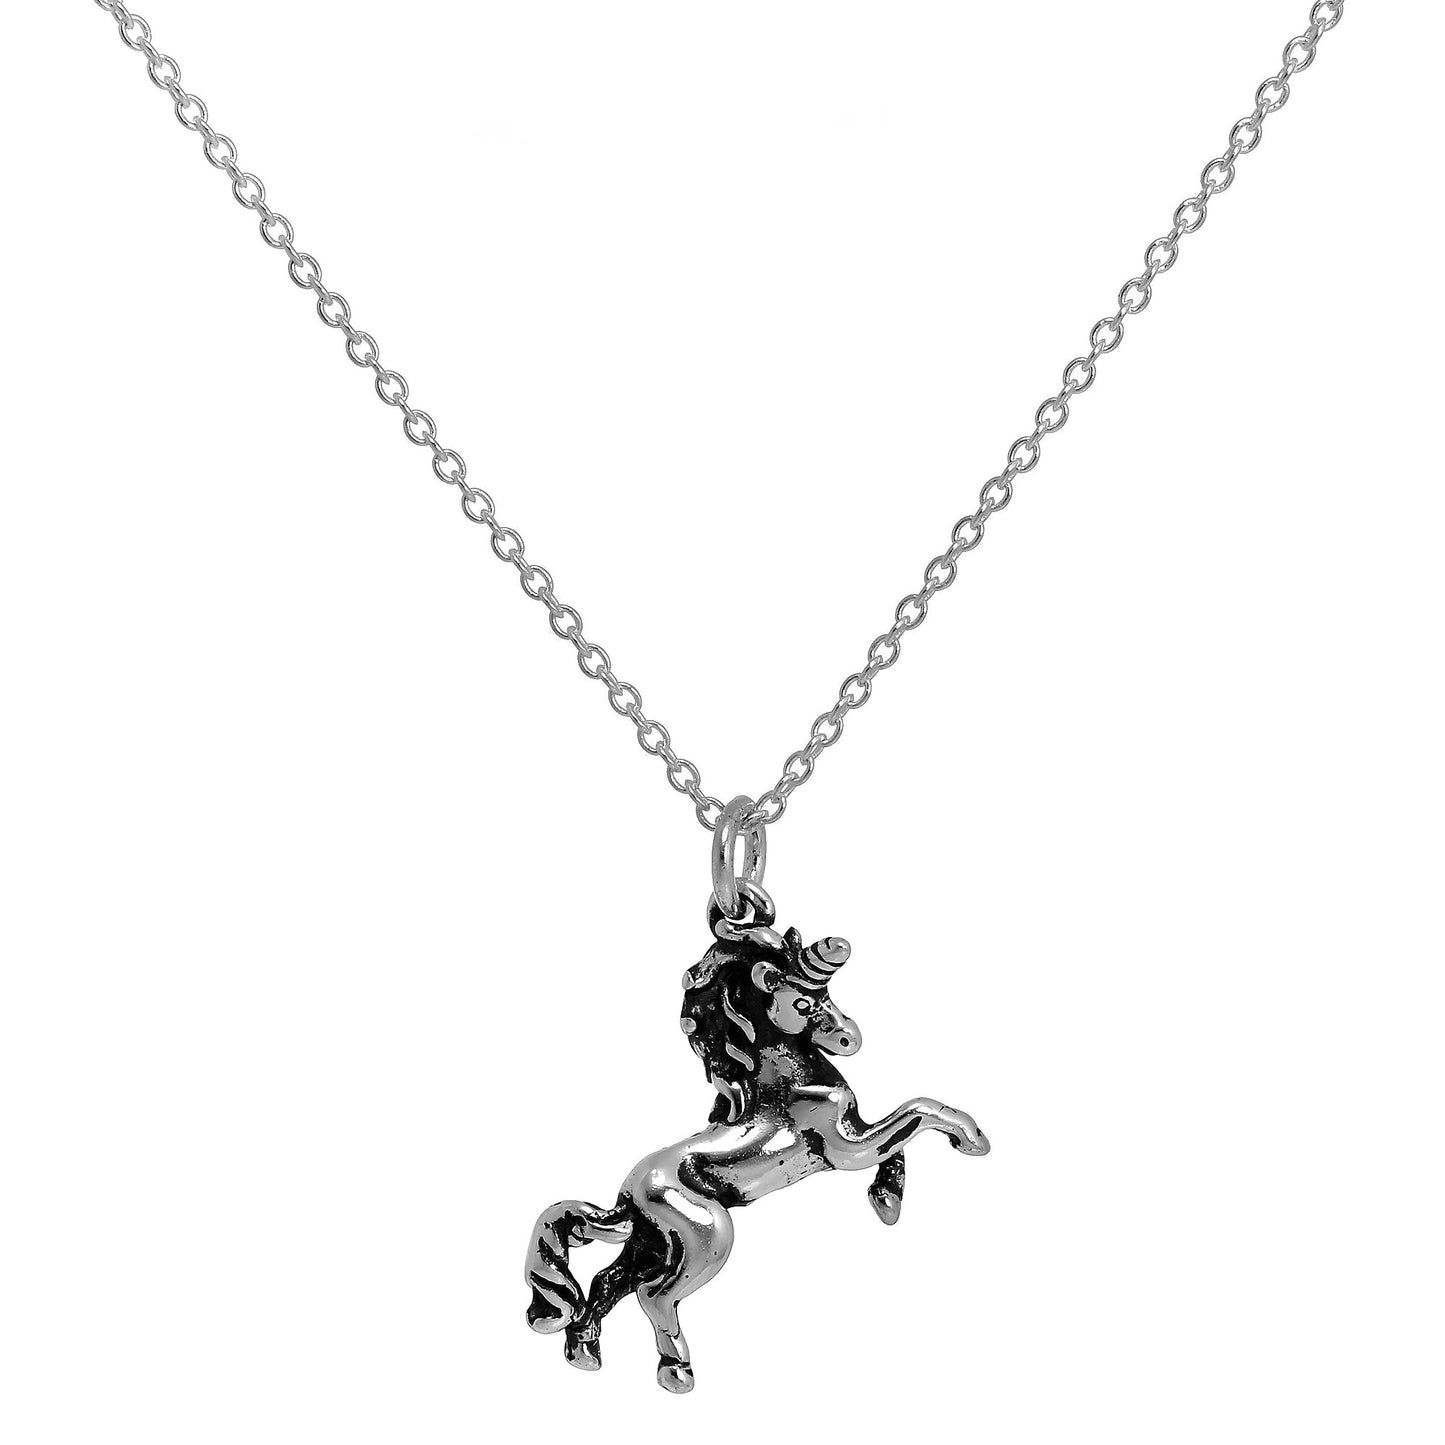 Sterling Silver Prancing Unicorn Necklace on Trace Chain 16 - 22 Inches